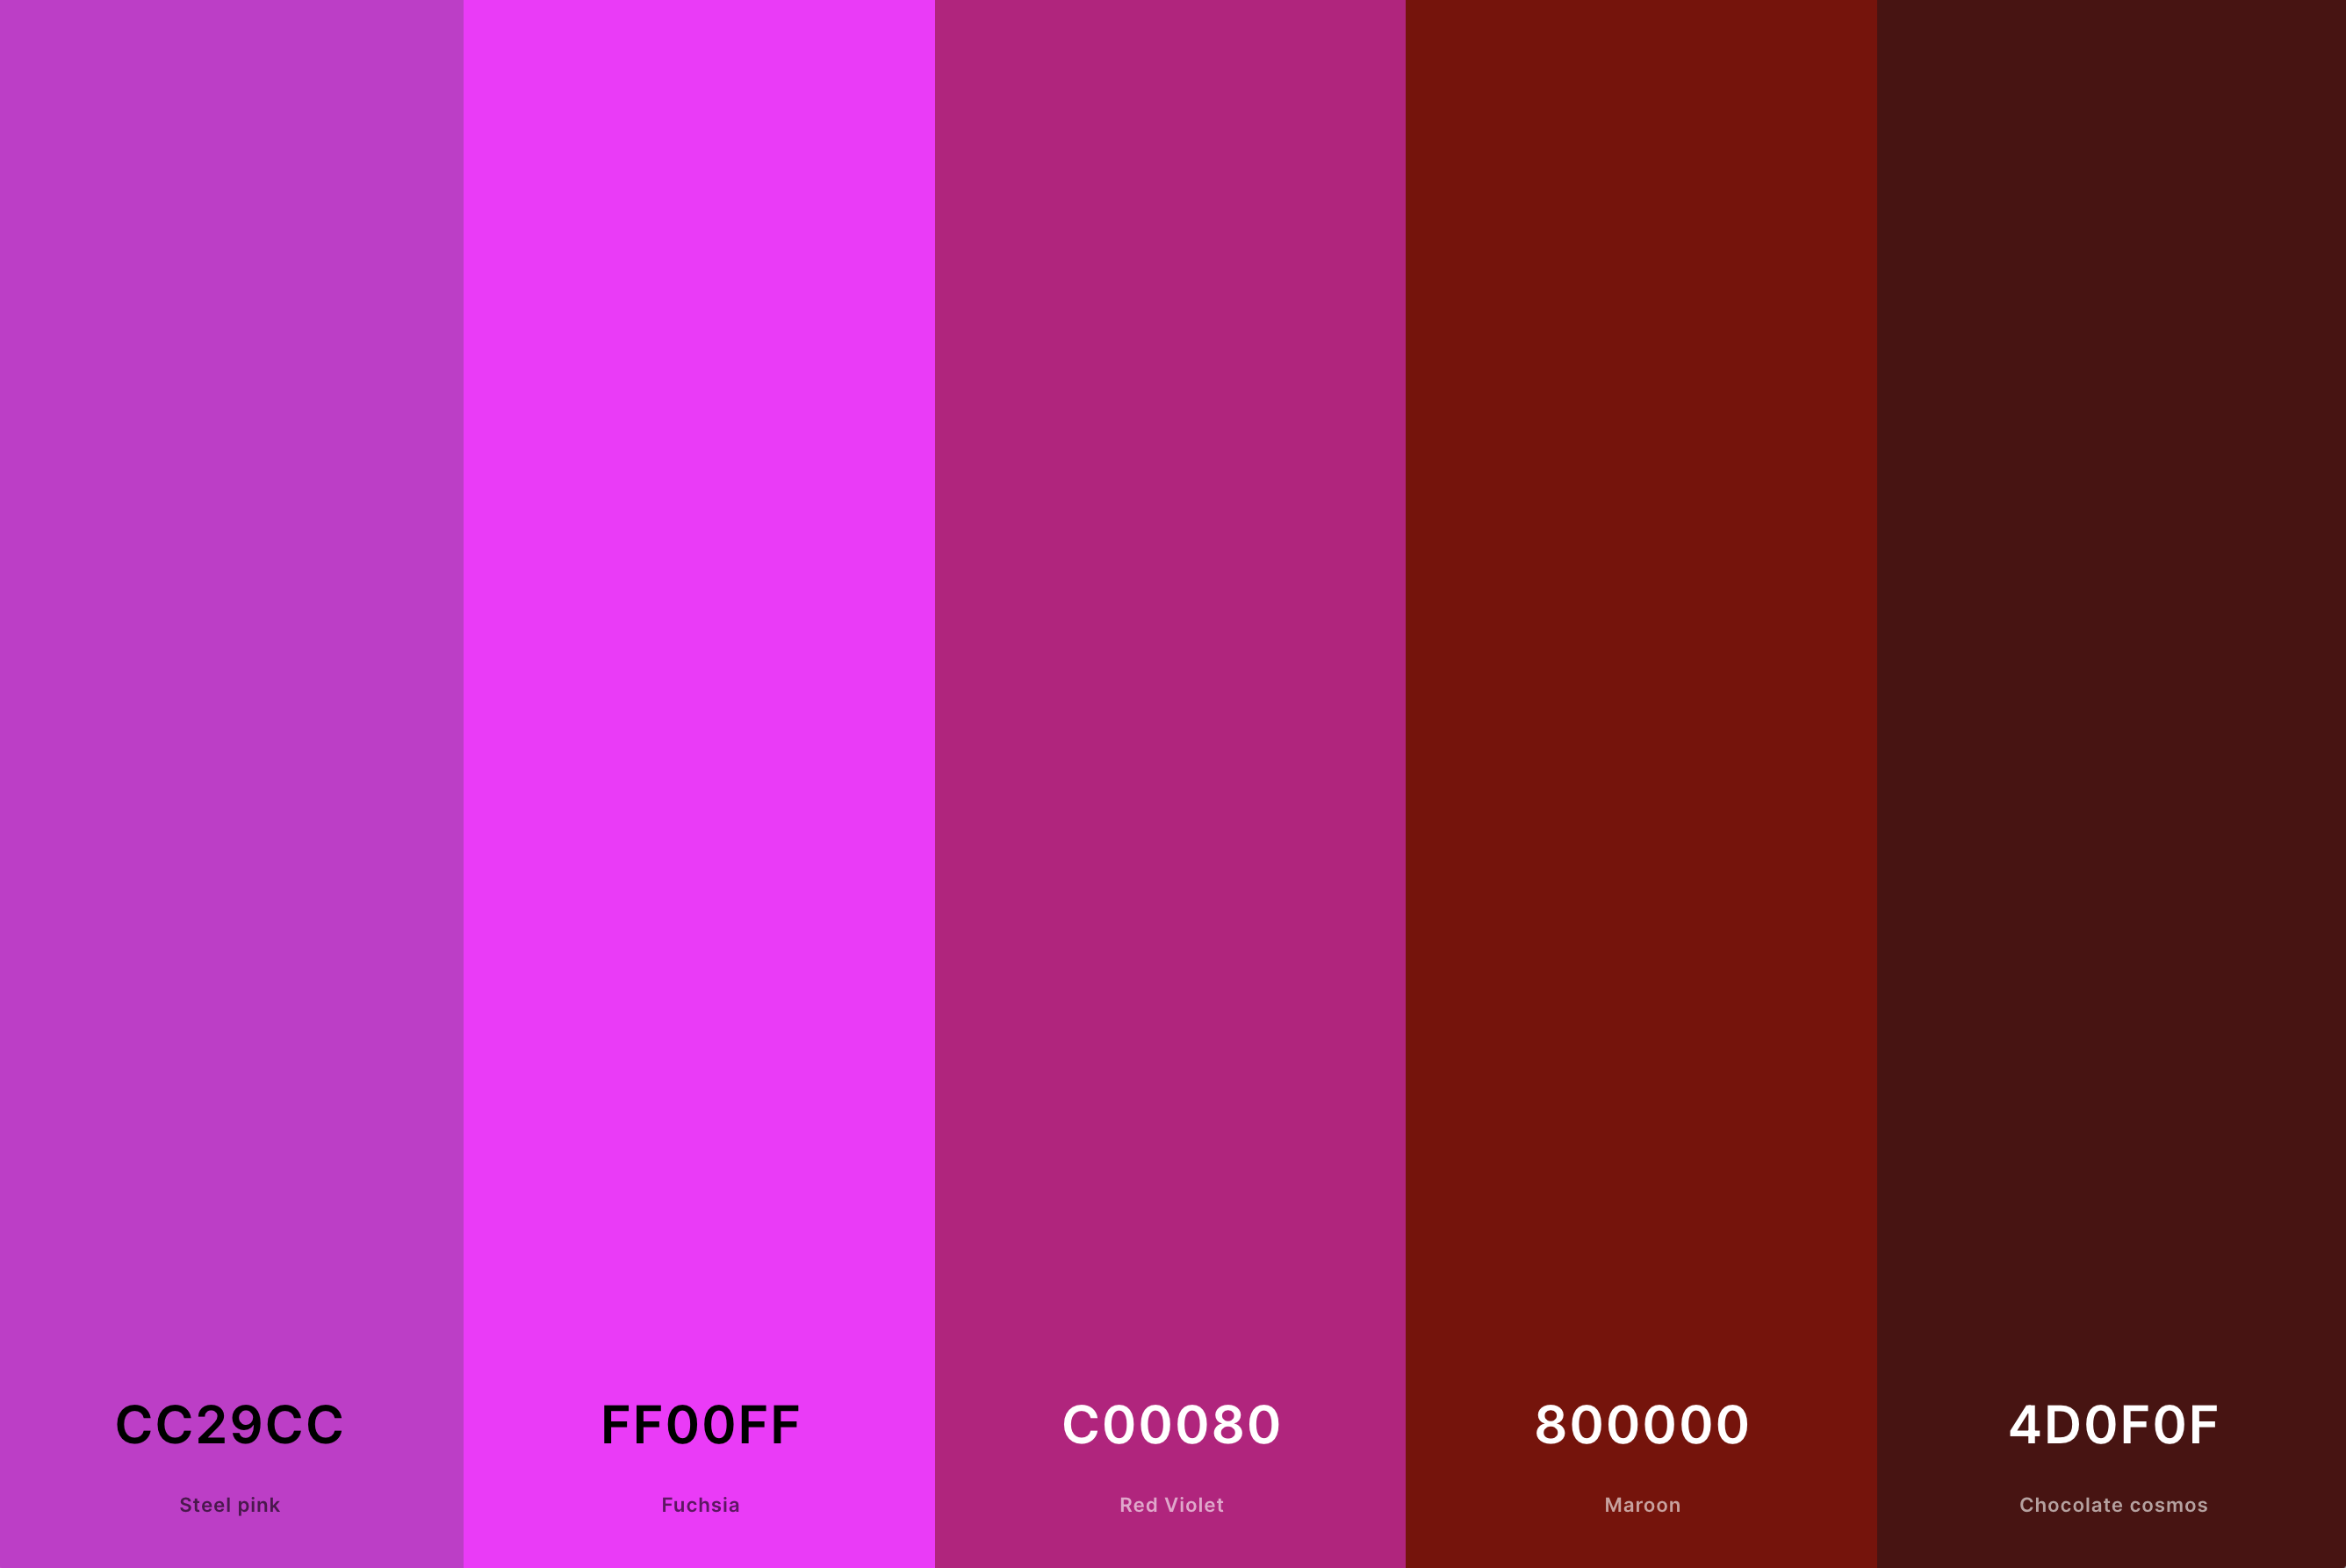 27. Magenta And Maroon Color Palette Color Palette with Steel Pink (Hex #CC29CC) + Magenta (Hex #FF00FF) + Red Violet (Hex #C00080) + Maroon (Hex #800000) + Chocolate Cosmos (Hex #4D0F0F) Color Palette with Hex Codes